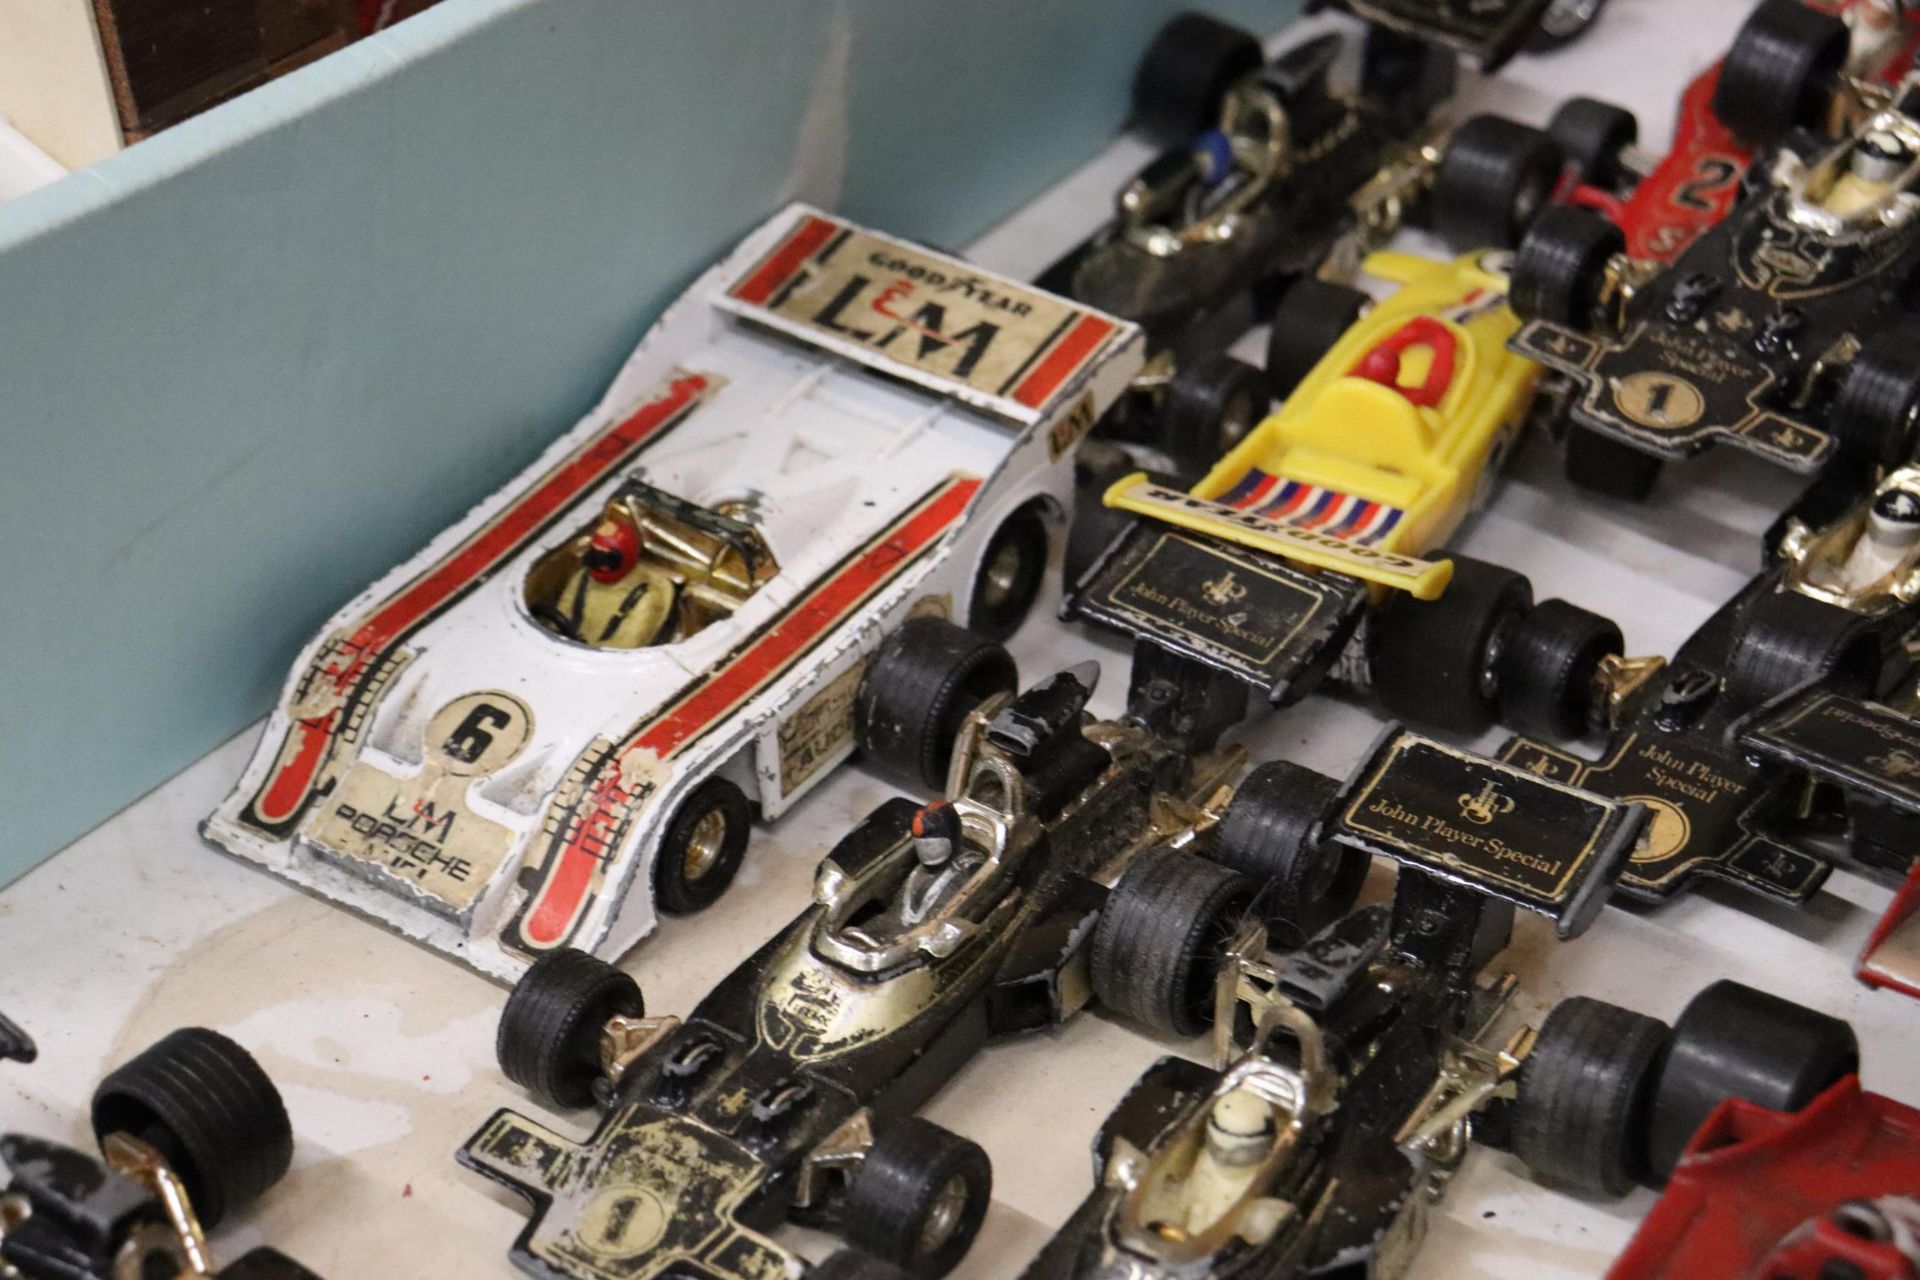 A LARGE QUANTITY OF VINTAGE DIE-CAST CORGI AND MATCHBOX F1 RACING CARS - Image 3 of 9